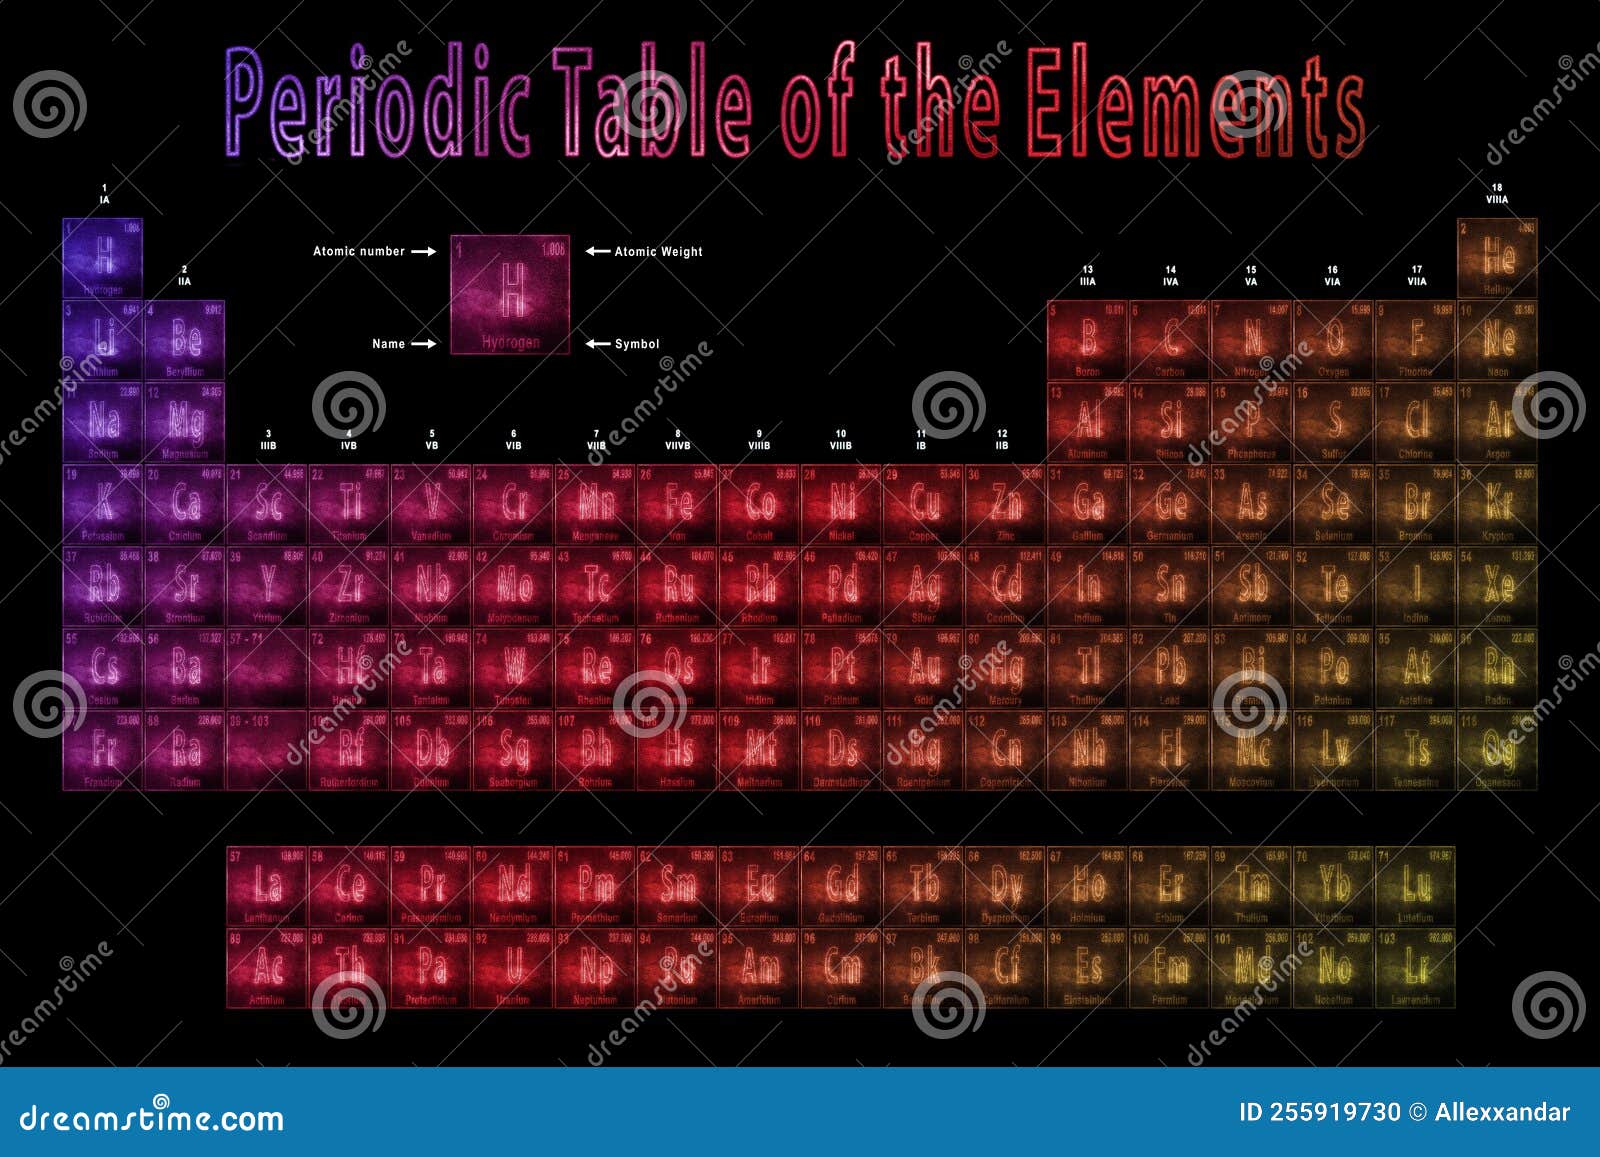 periodic table desktop background - Coolwallpapers.me!